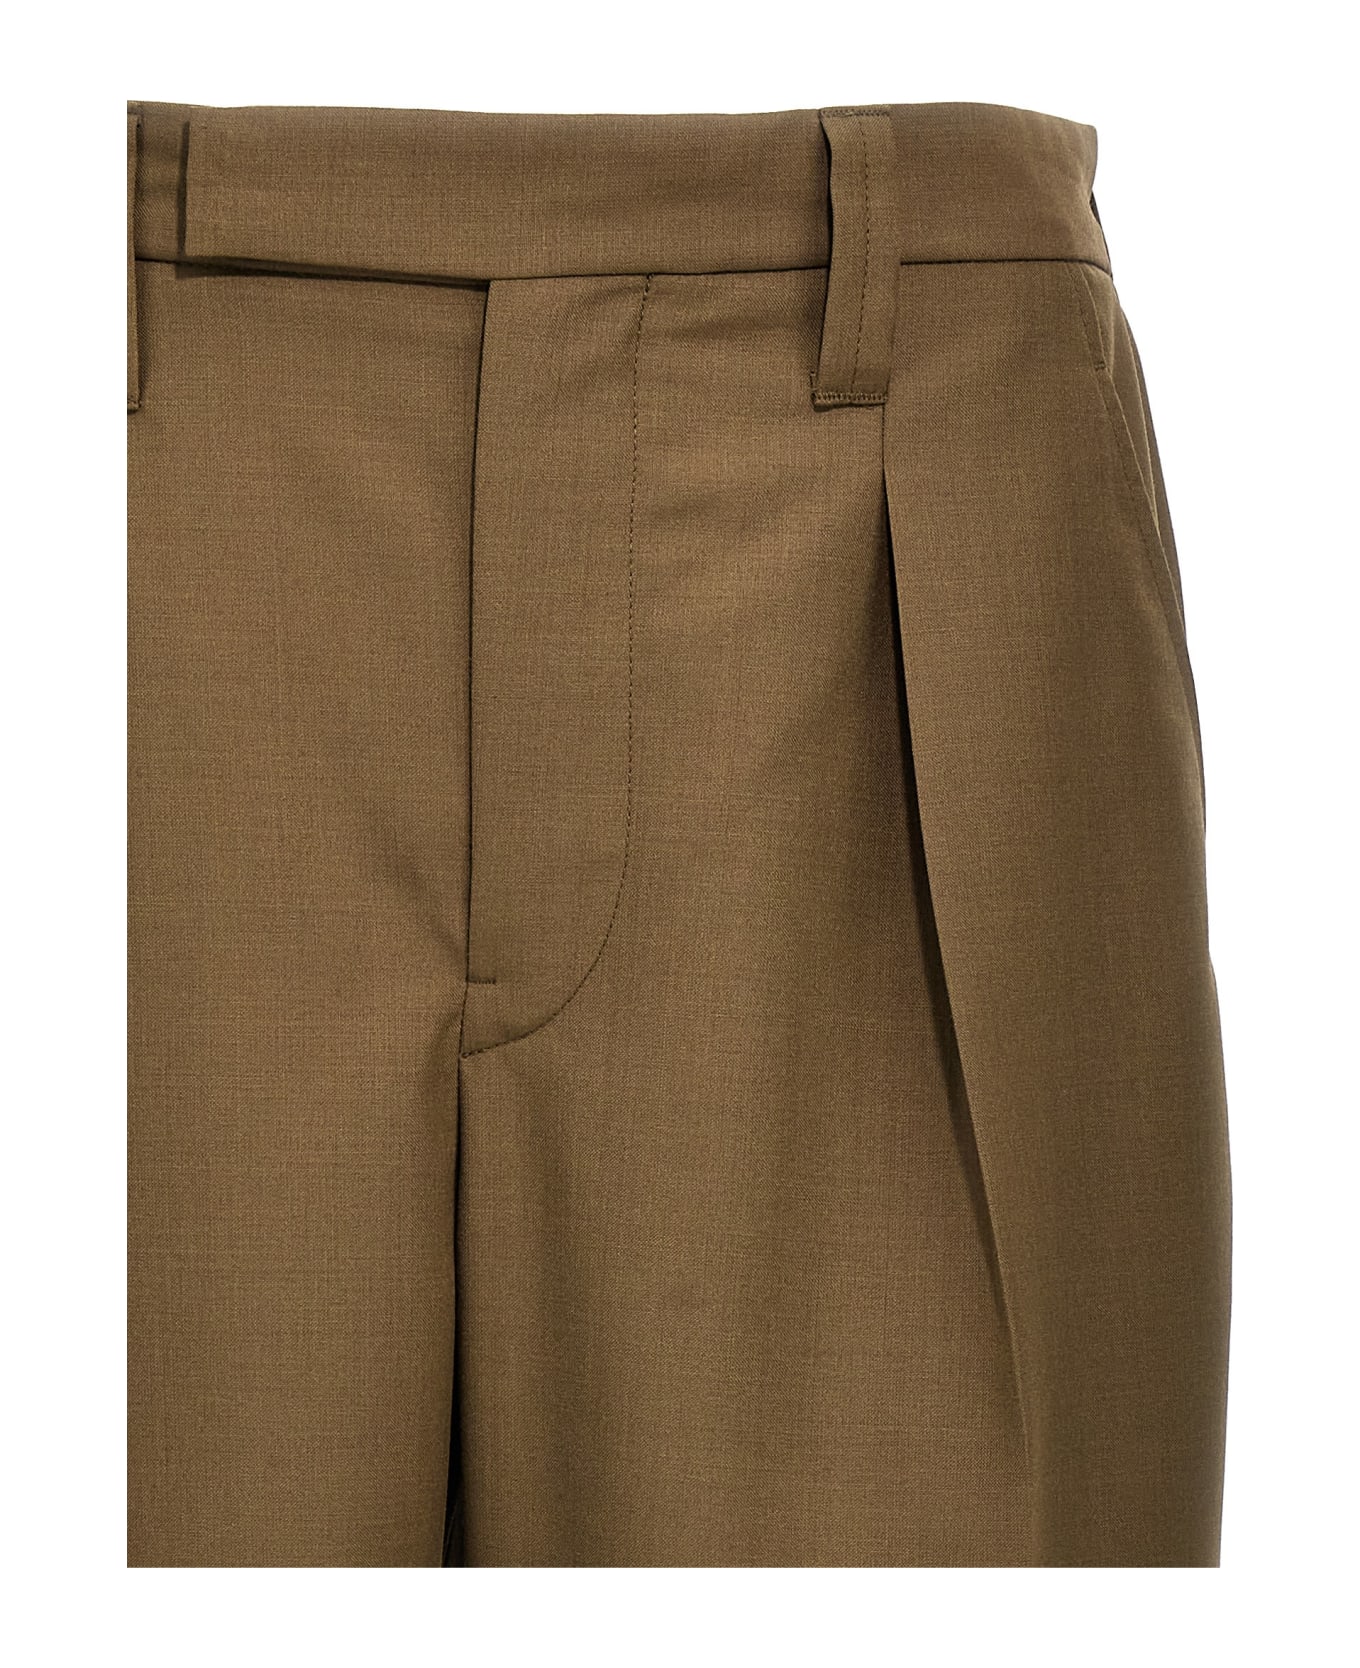 Lemaire 'one Pleat' Trousers - Brown ボトムス